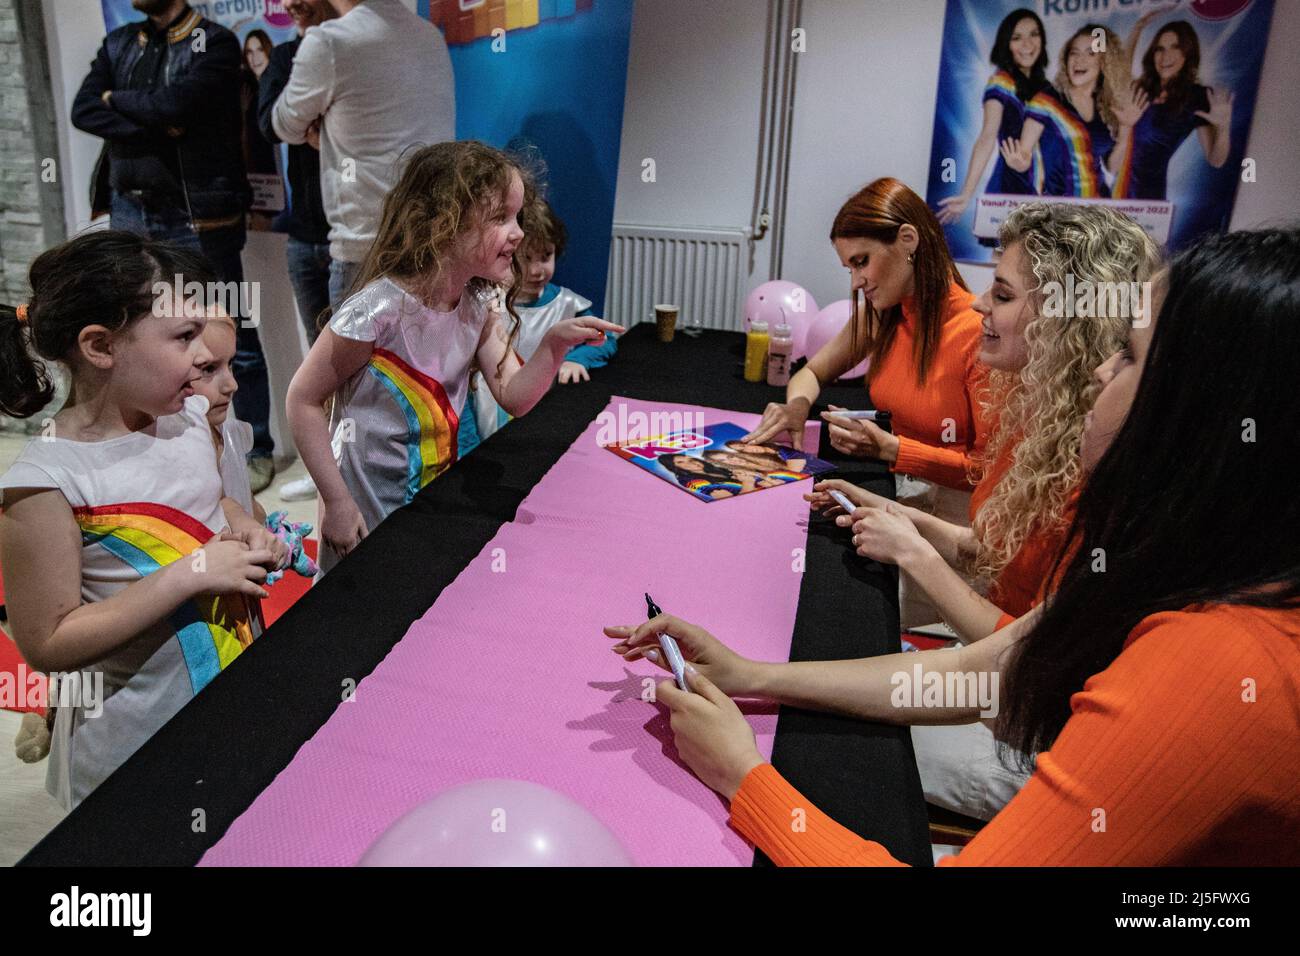 2022-04-23 11:52:48 BERGEN OP ZOOM - The Belgian girl group K3 with from left to right Hanne Verbruggen, Julia Boschman and Marthe DePillecyn will sign the new album Waterval during Record Store Day. Many fans, both young and old, stood in a line of more than a hundred meters for a long time. ANP KIPPA PAUL BERGEN netherlands out - belgium out Credit: ANP/Alamy Live News Stock Photo